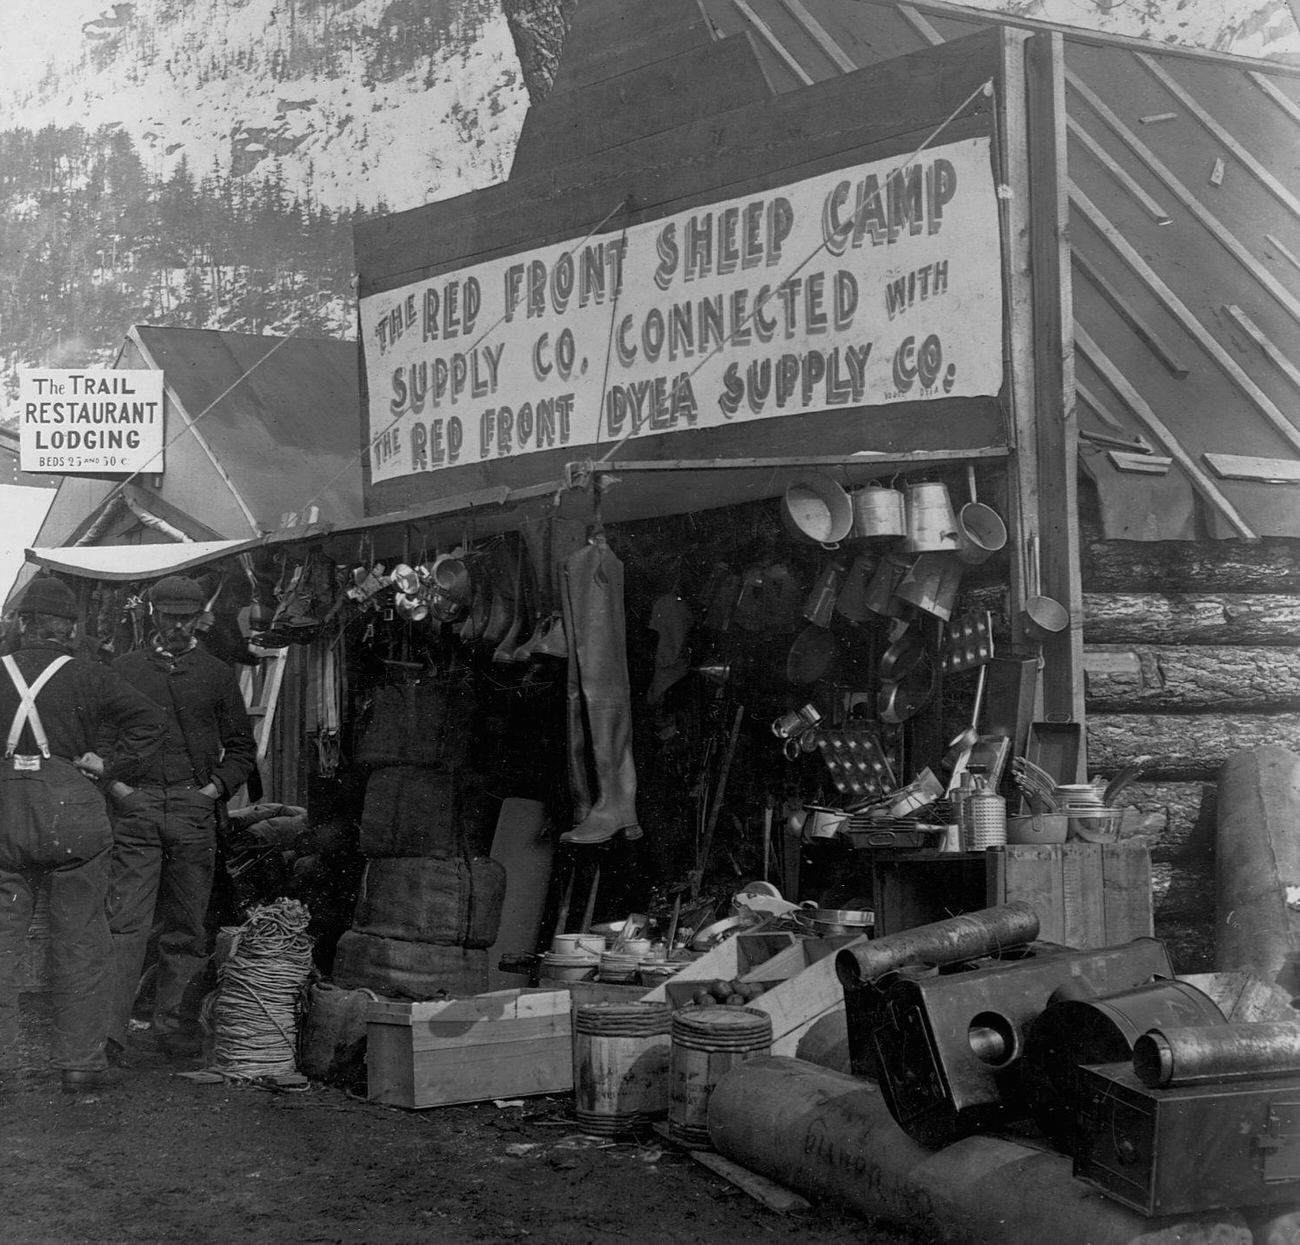 Red Front Sheep Camp Supply Company tent and log structure in Sheep Camp, Alaska, 1898.